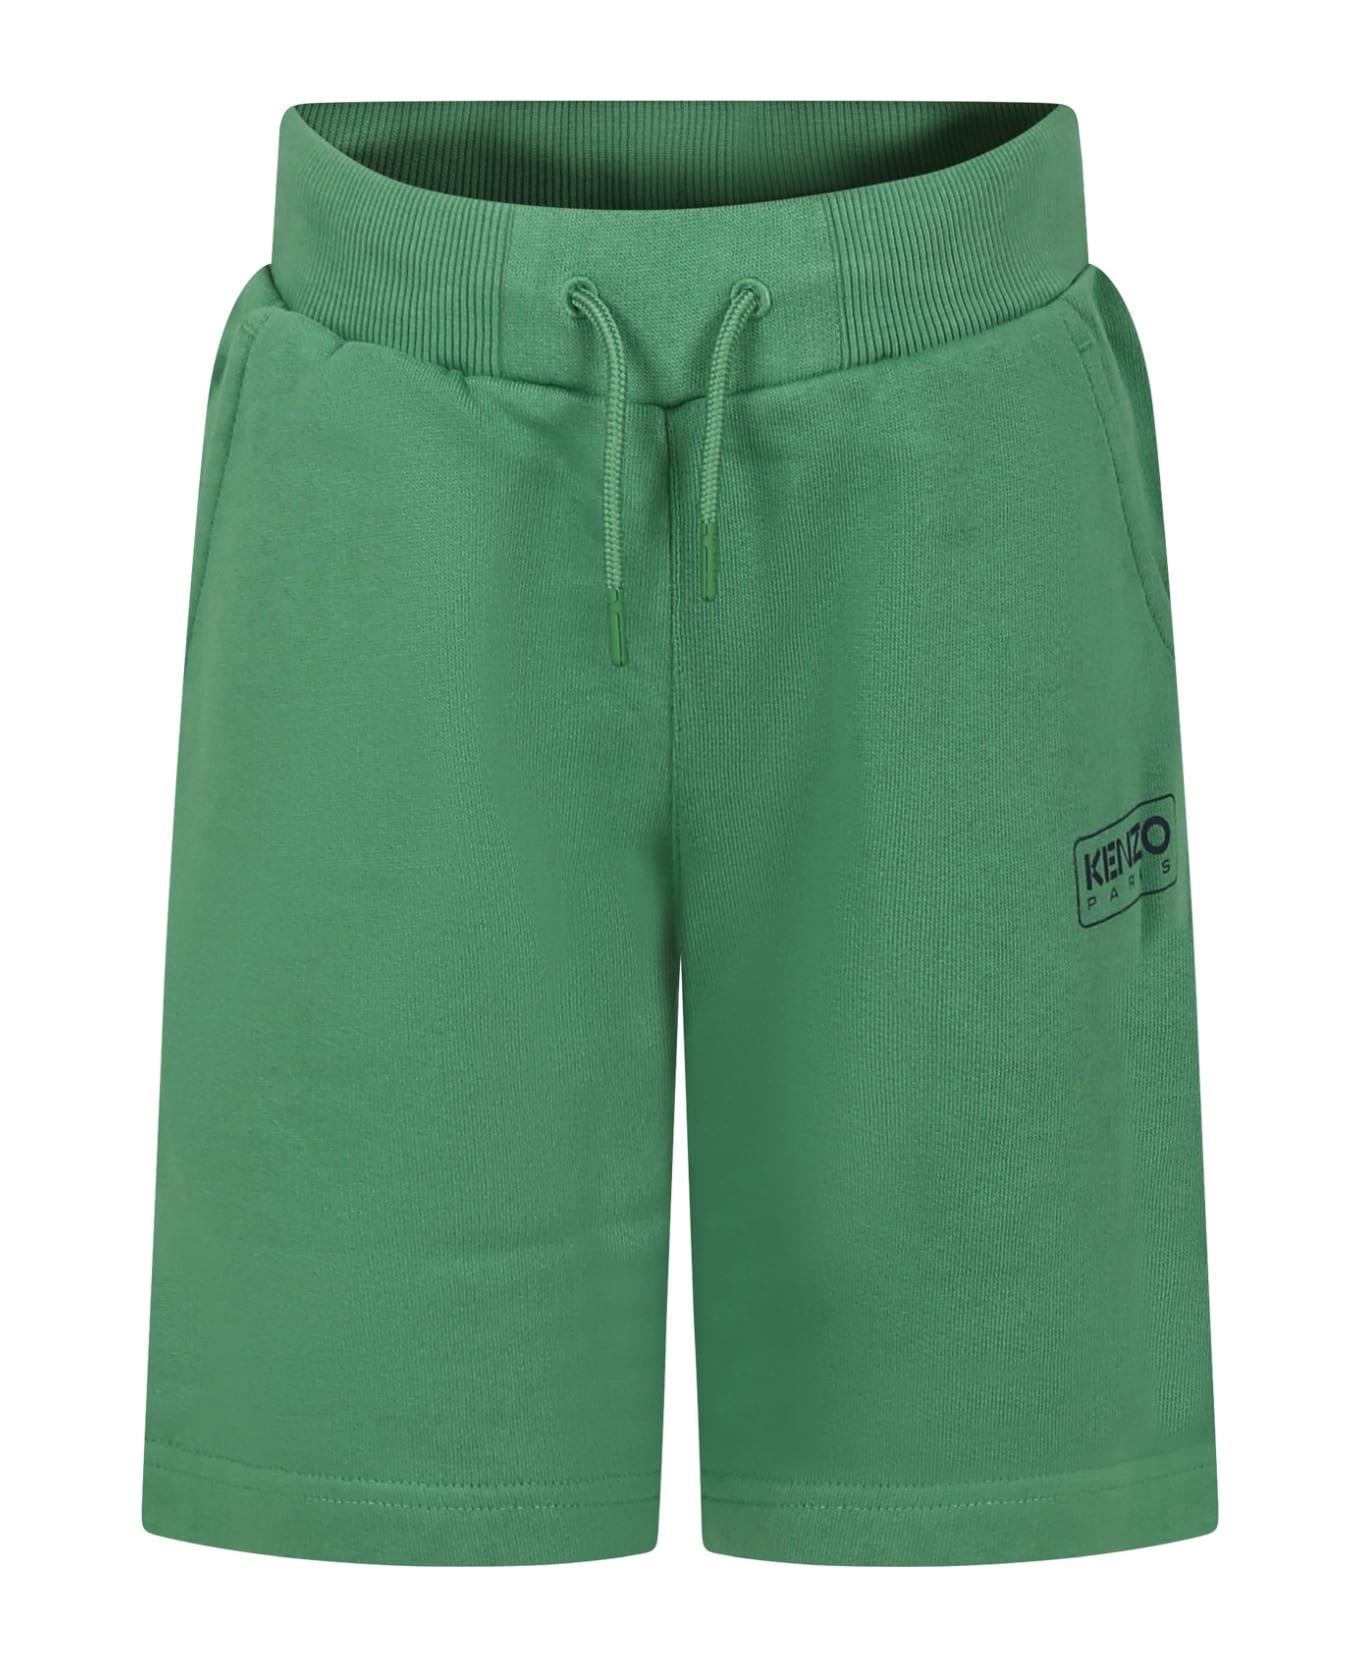 Kenzo Kids Green Shorts For Boy With Logo Print - Green ボトムス